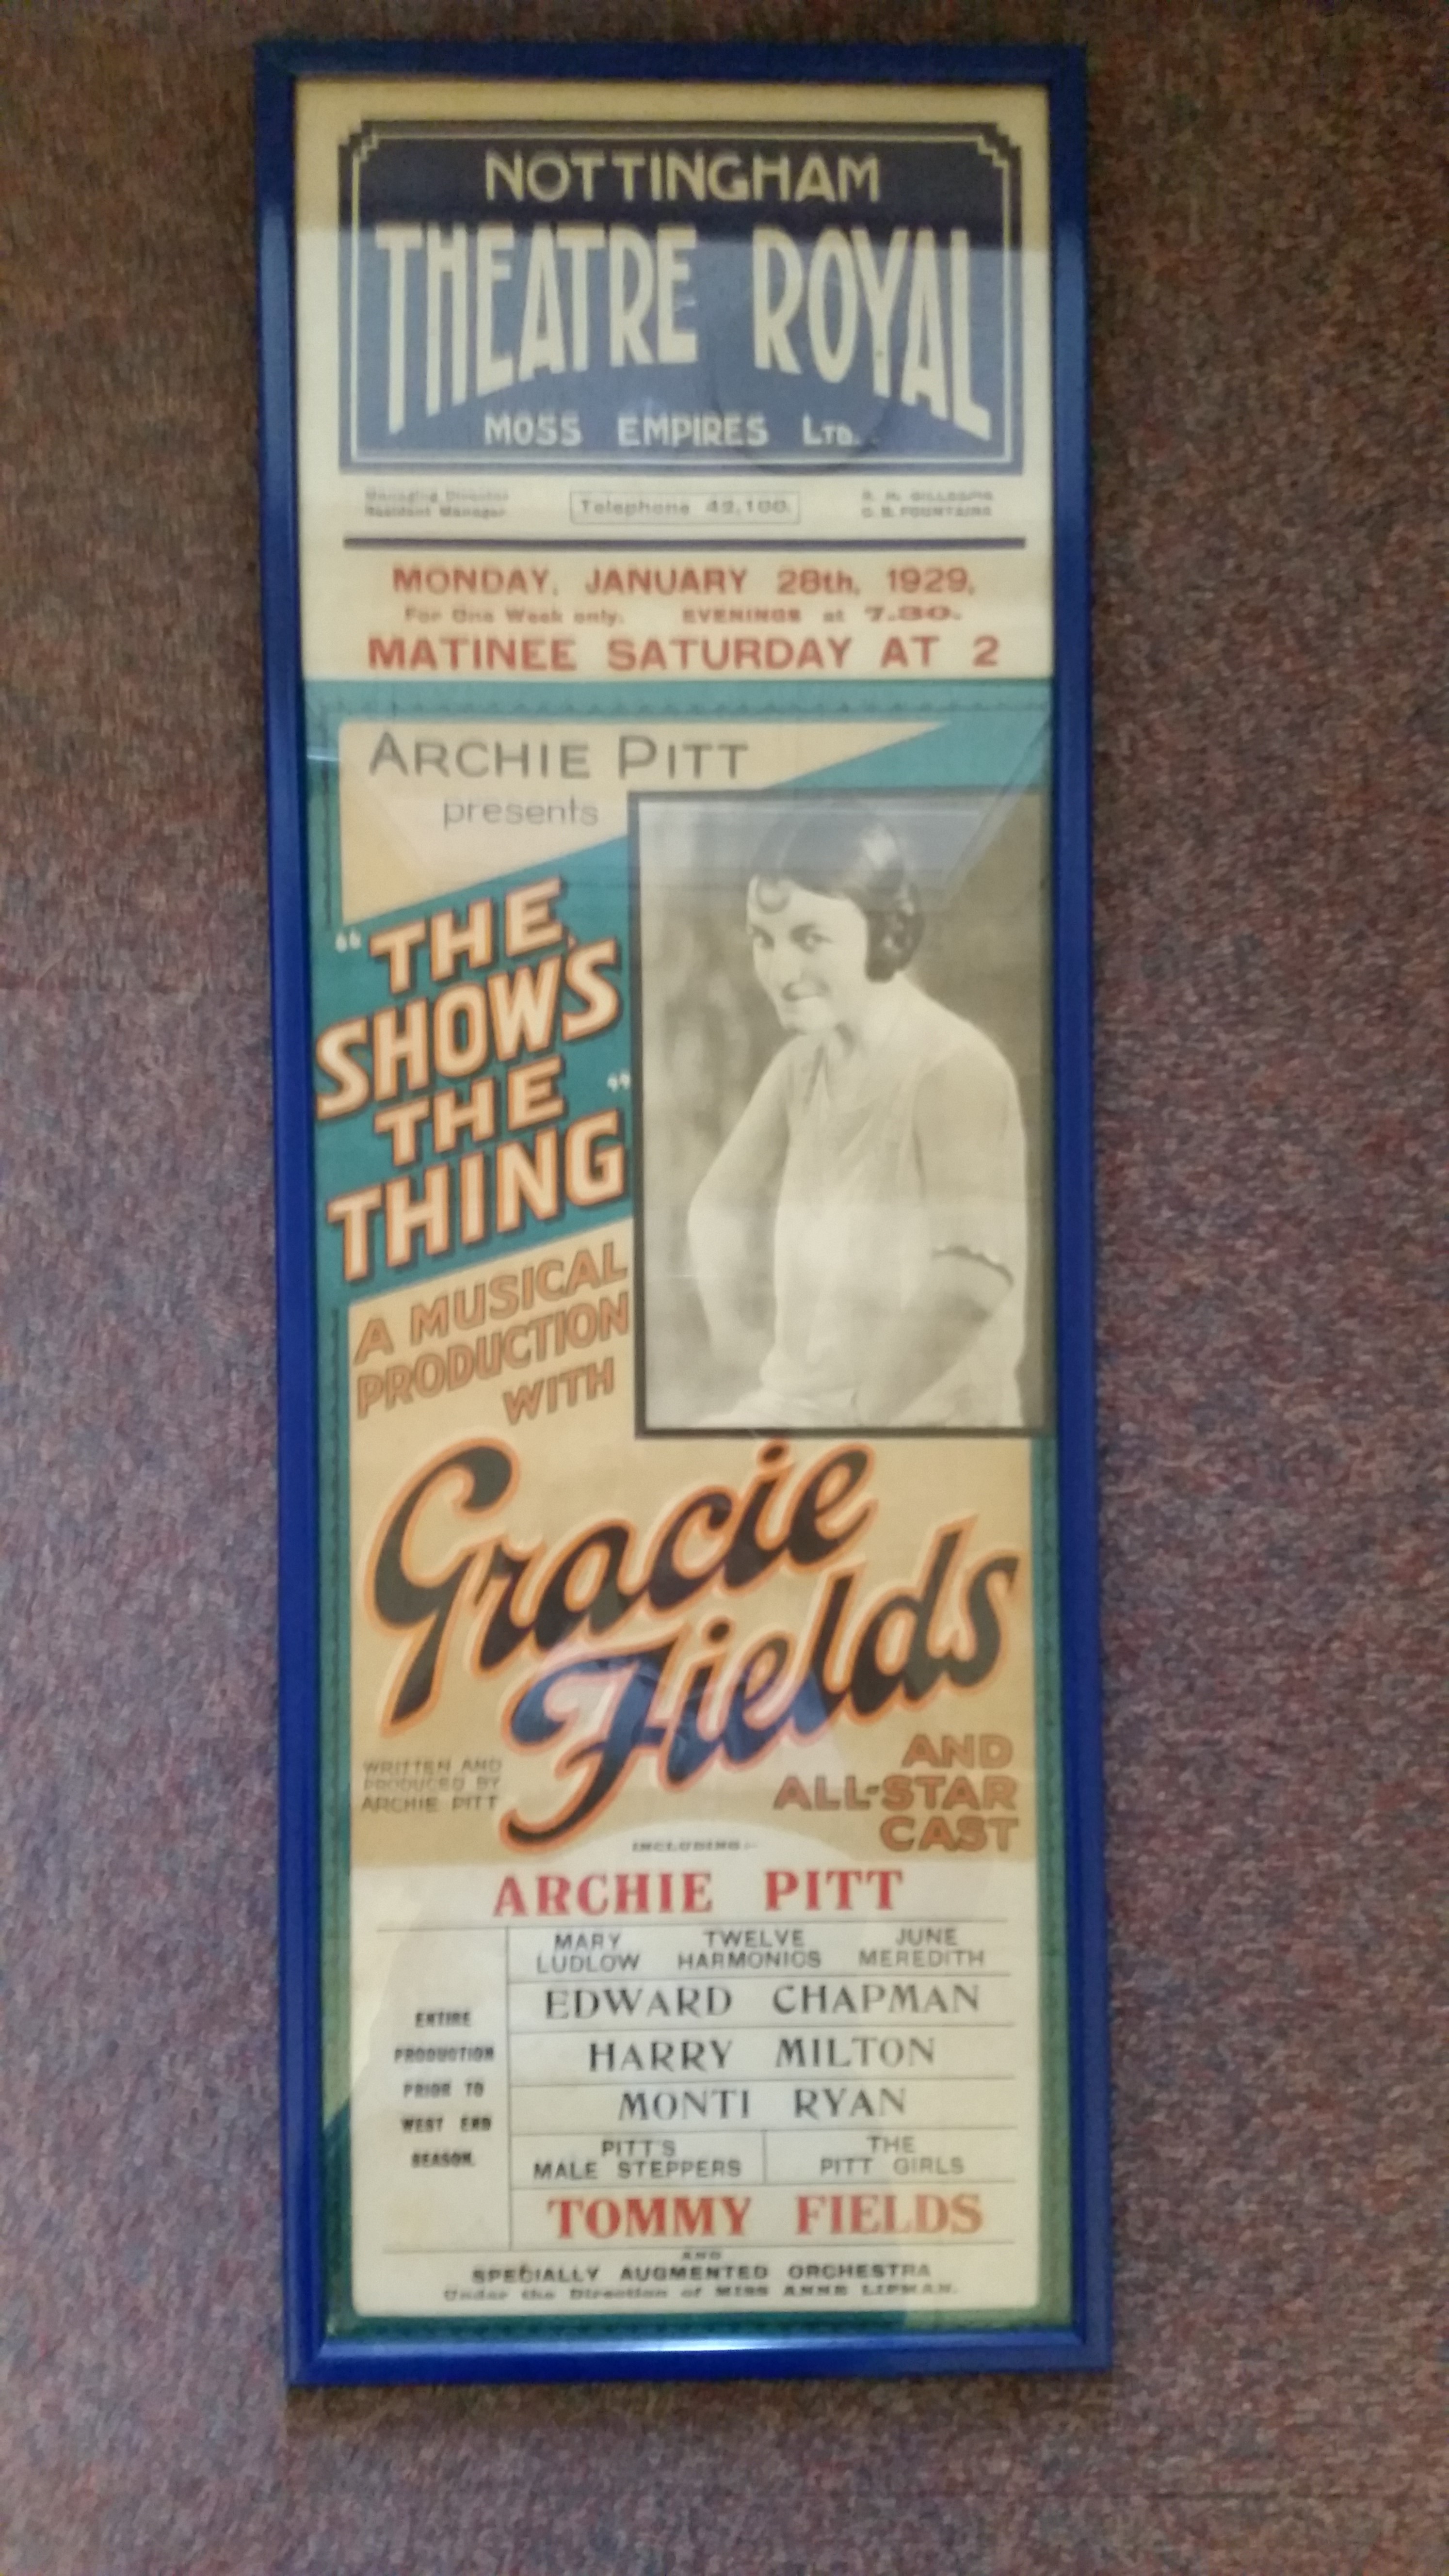 THEATRE, poster, Gracie Fields, The Show's The Thing', Nottingham Theatre Royal, 28th Jan 1929,